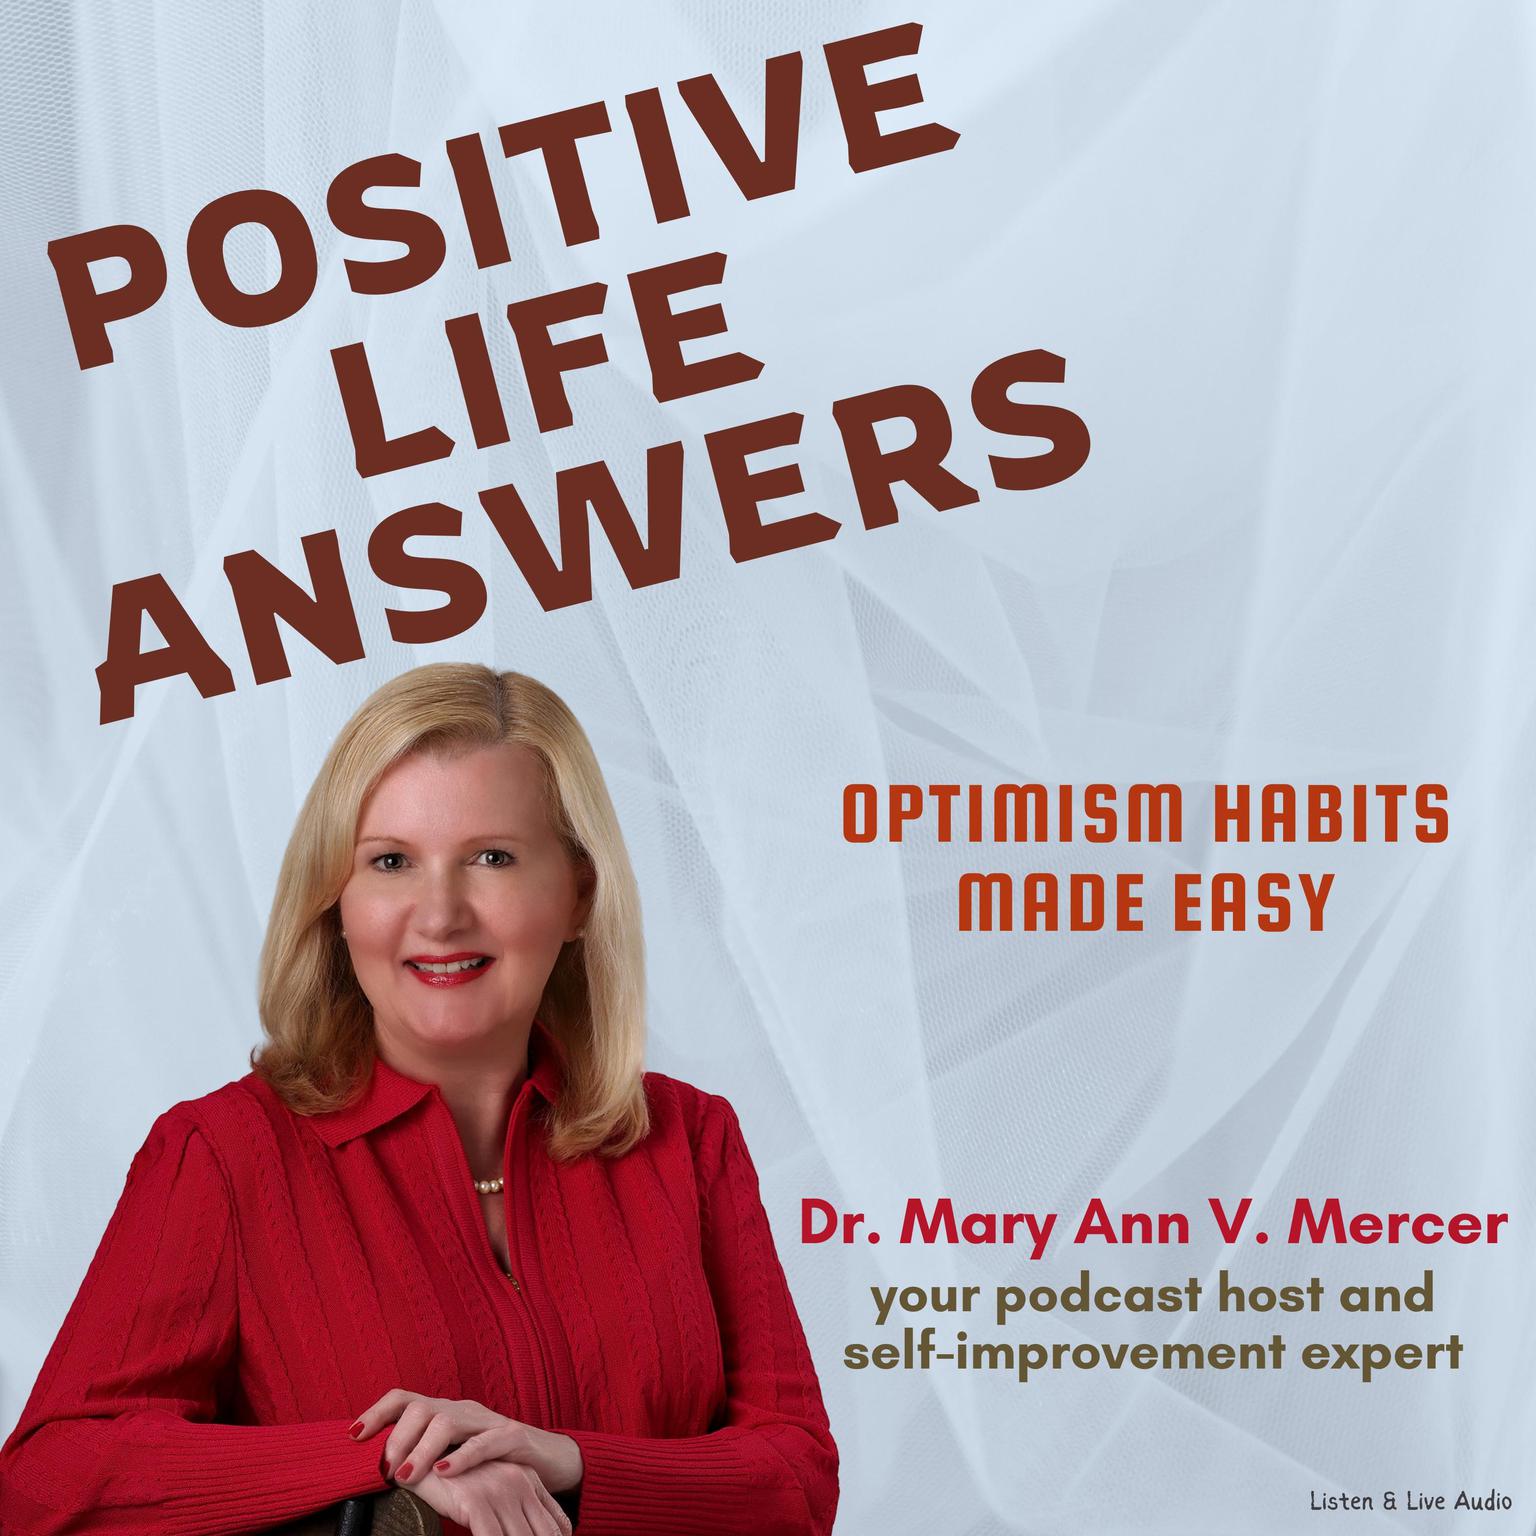 Positive Life Answers: Optimism Habits Made Easy Audiobook, by Michael Mercer